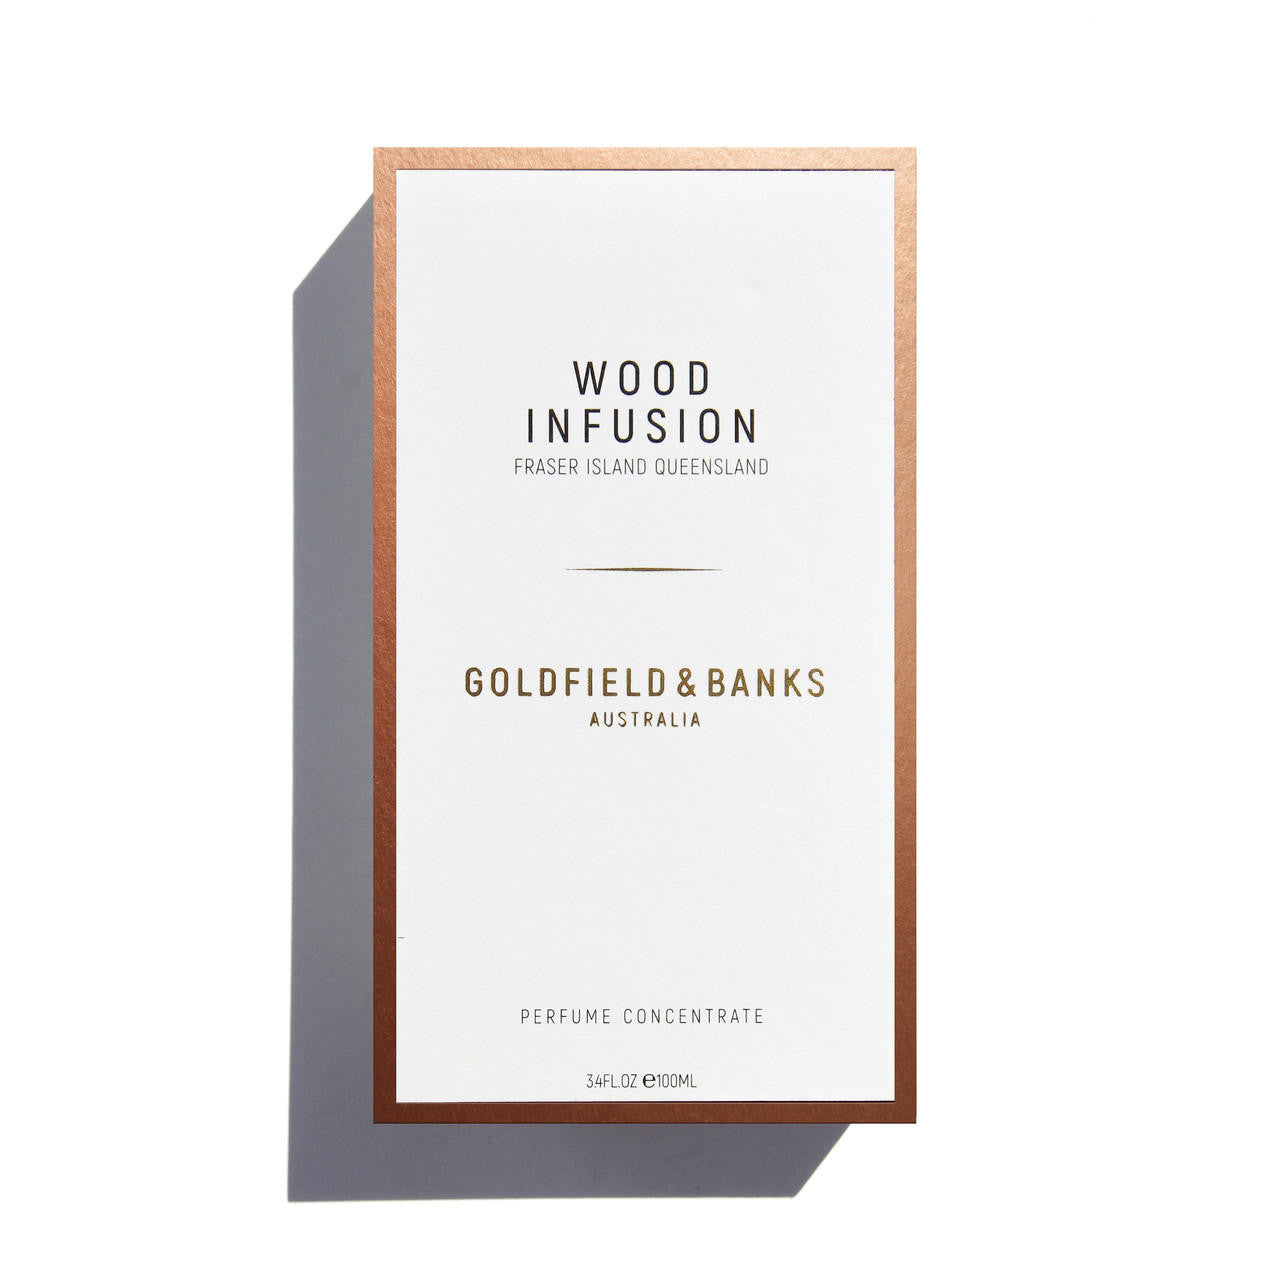  Goldfield & Banks Australia WOOD INFUSION Perfume Concentrate 